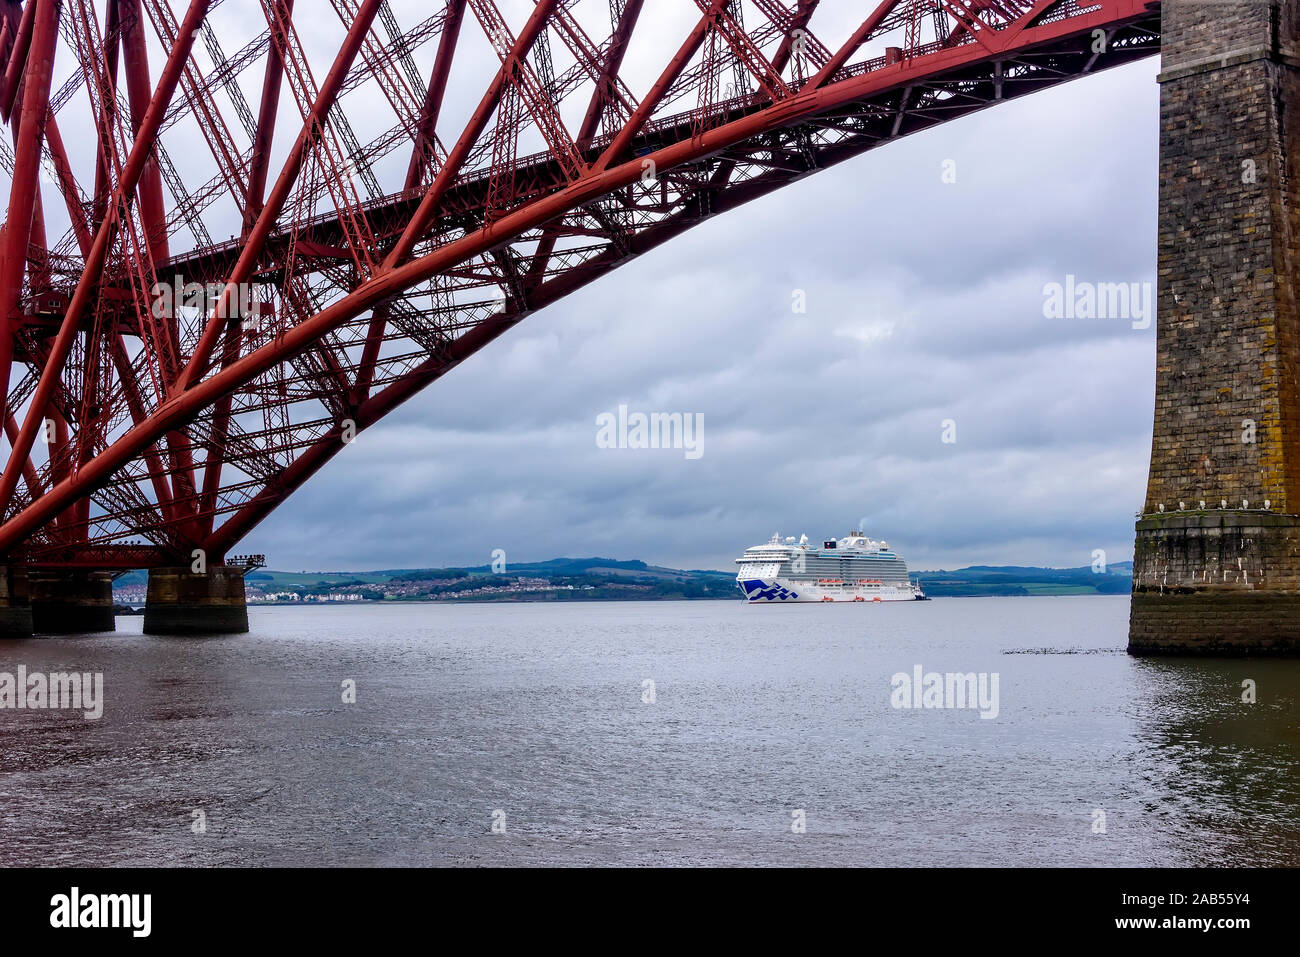 Edinburgh, Scotland - August 13, 2018:  Princess cruise ship, the Royal Princess, anchored in the Firth of Forth with the Forth Bridge overhead. Stock Photo